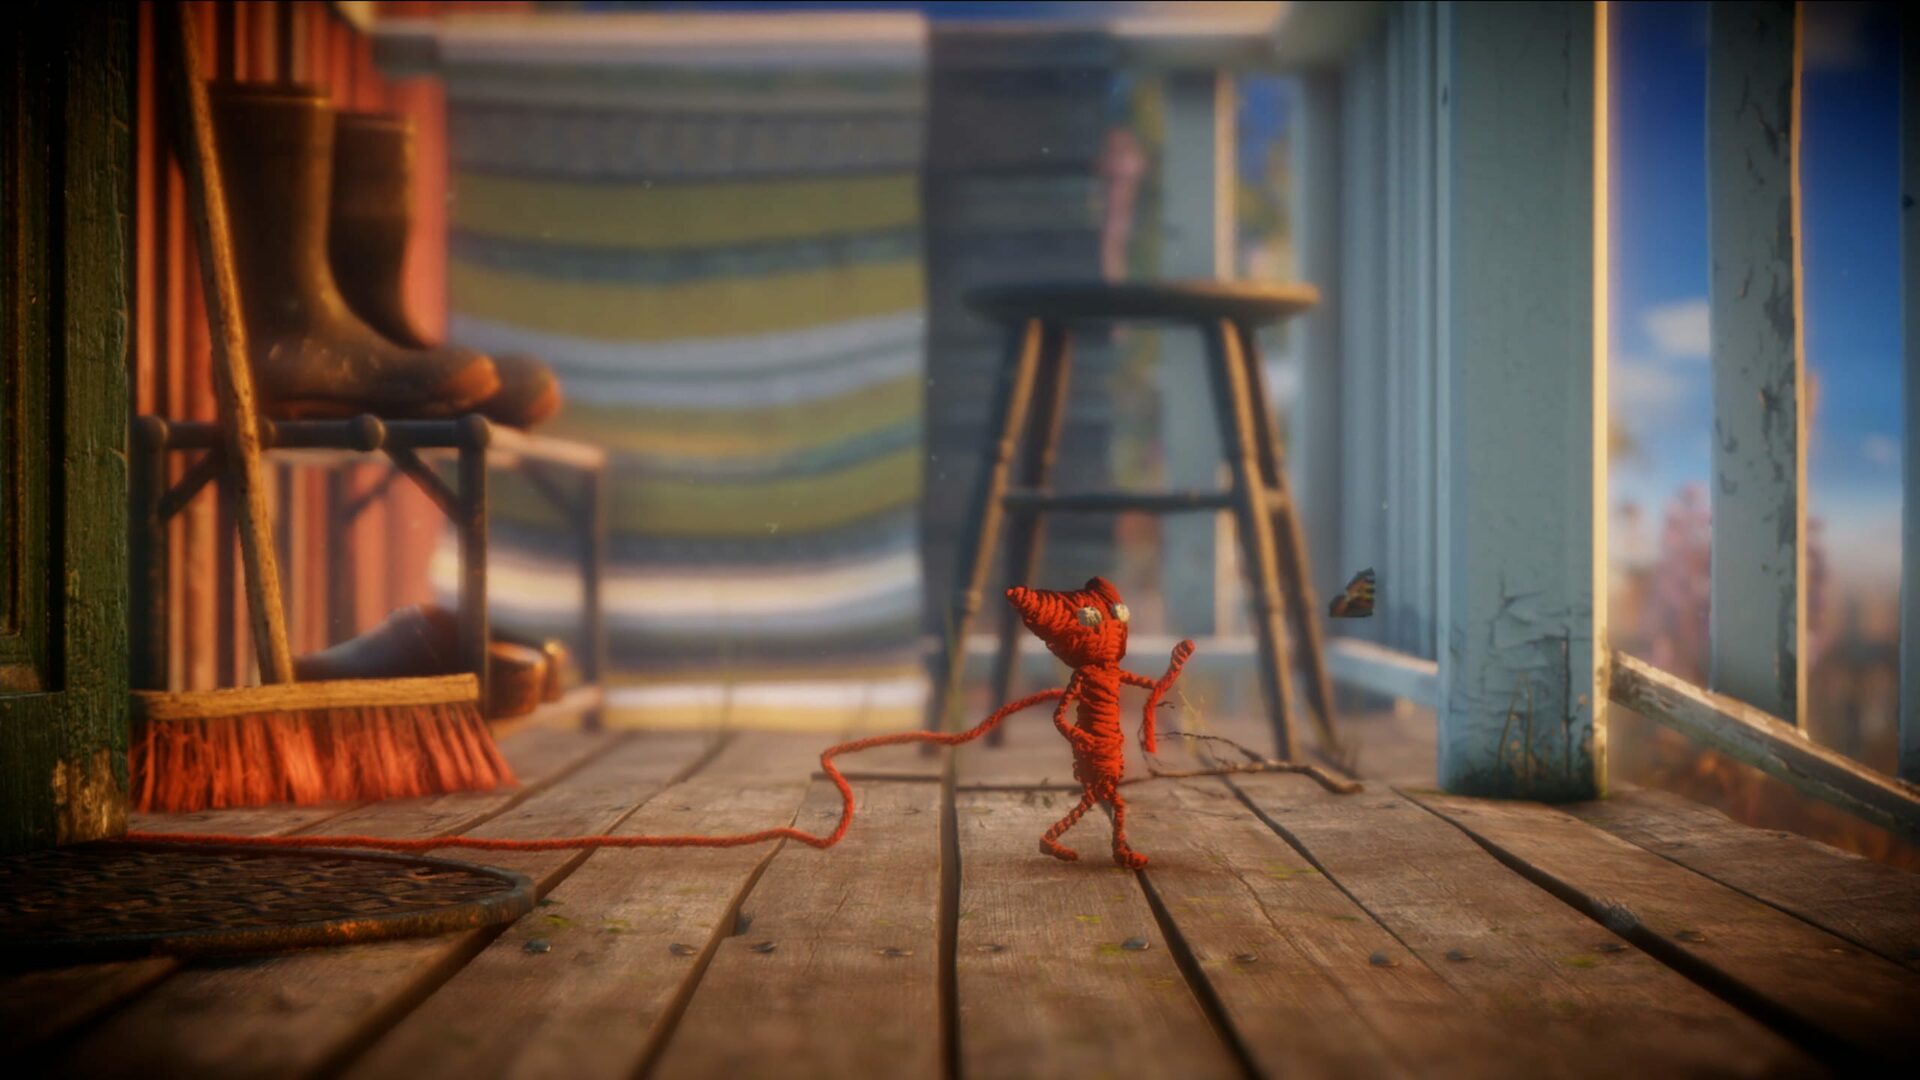 Buy Unravel Origin CD Key for a Good Price! Cheap!